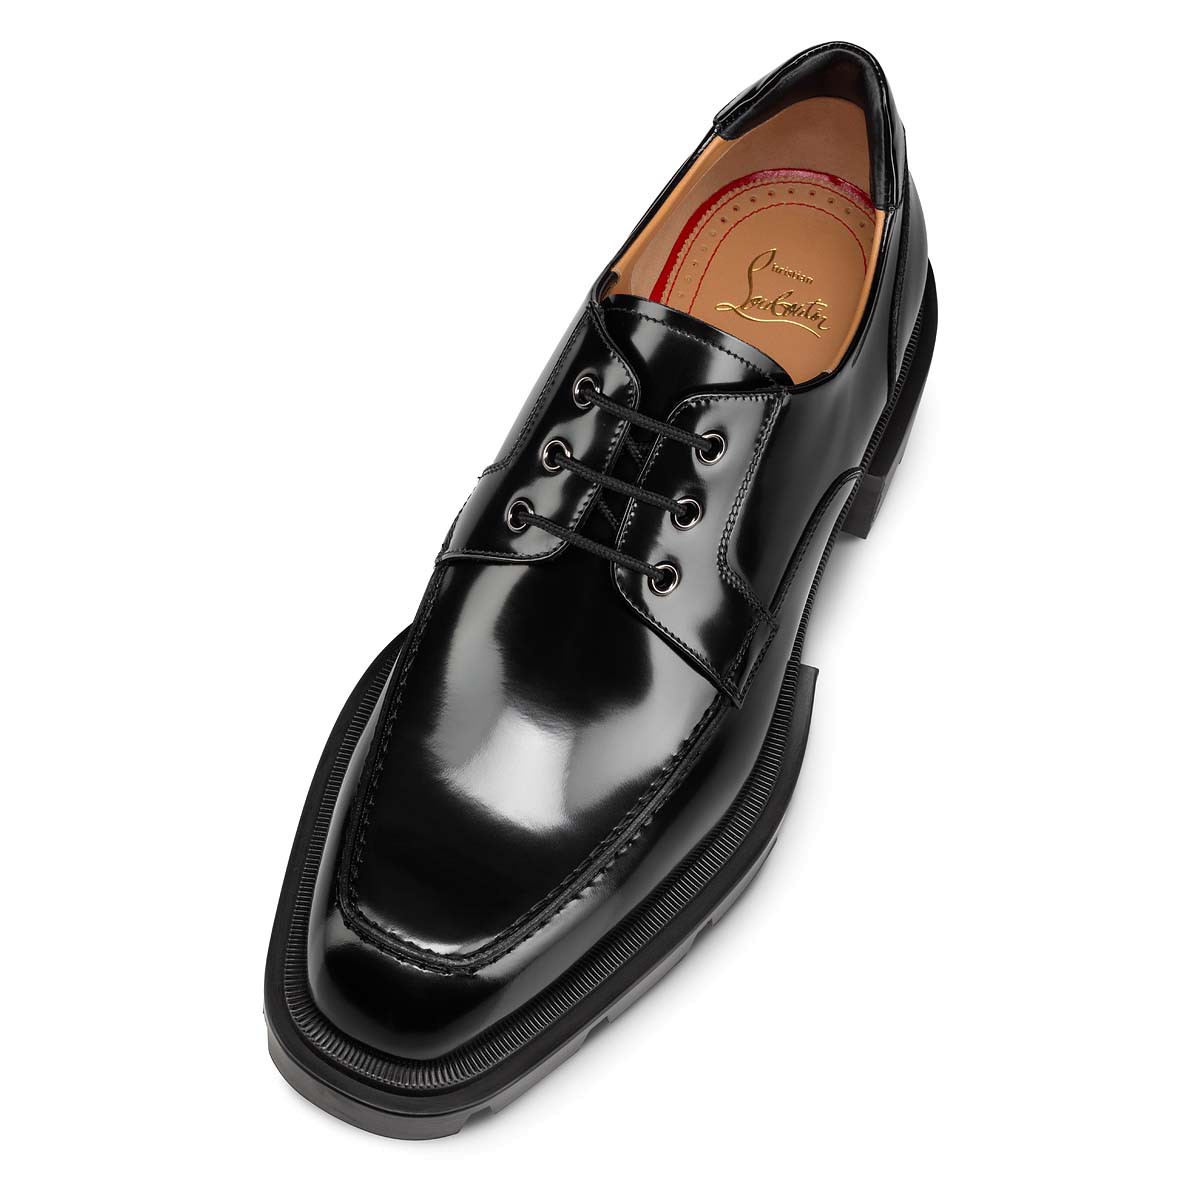 Our Georges L Black Calf leather - Men Shoes - Christian Louboutin